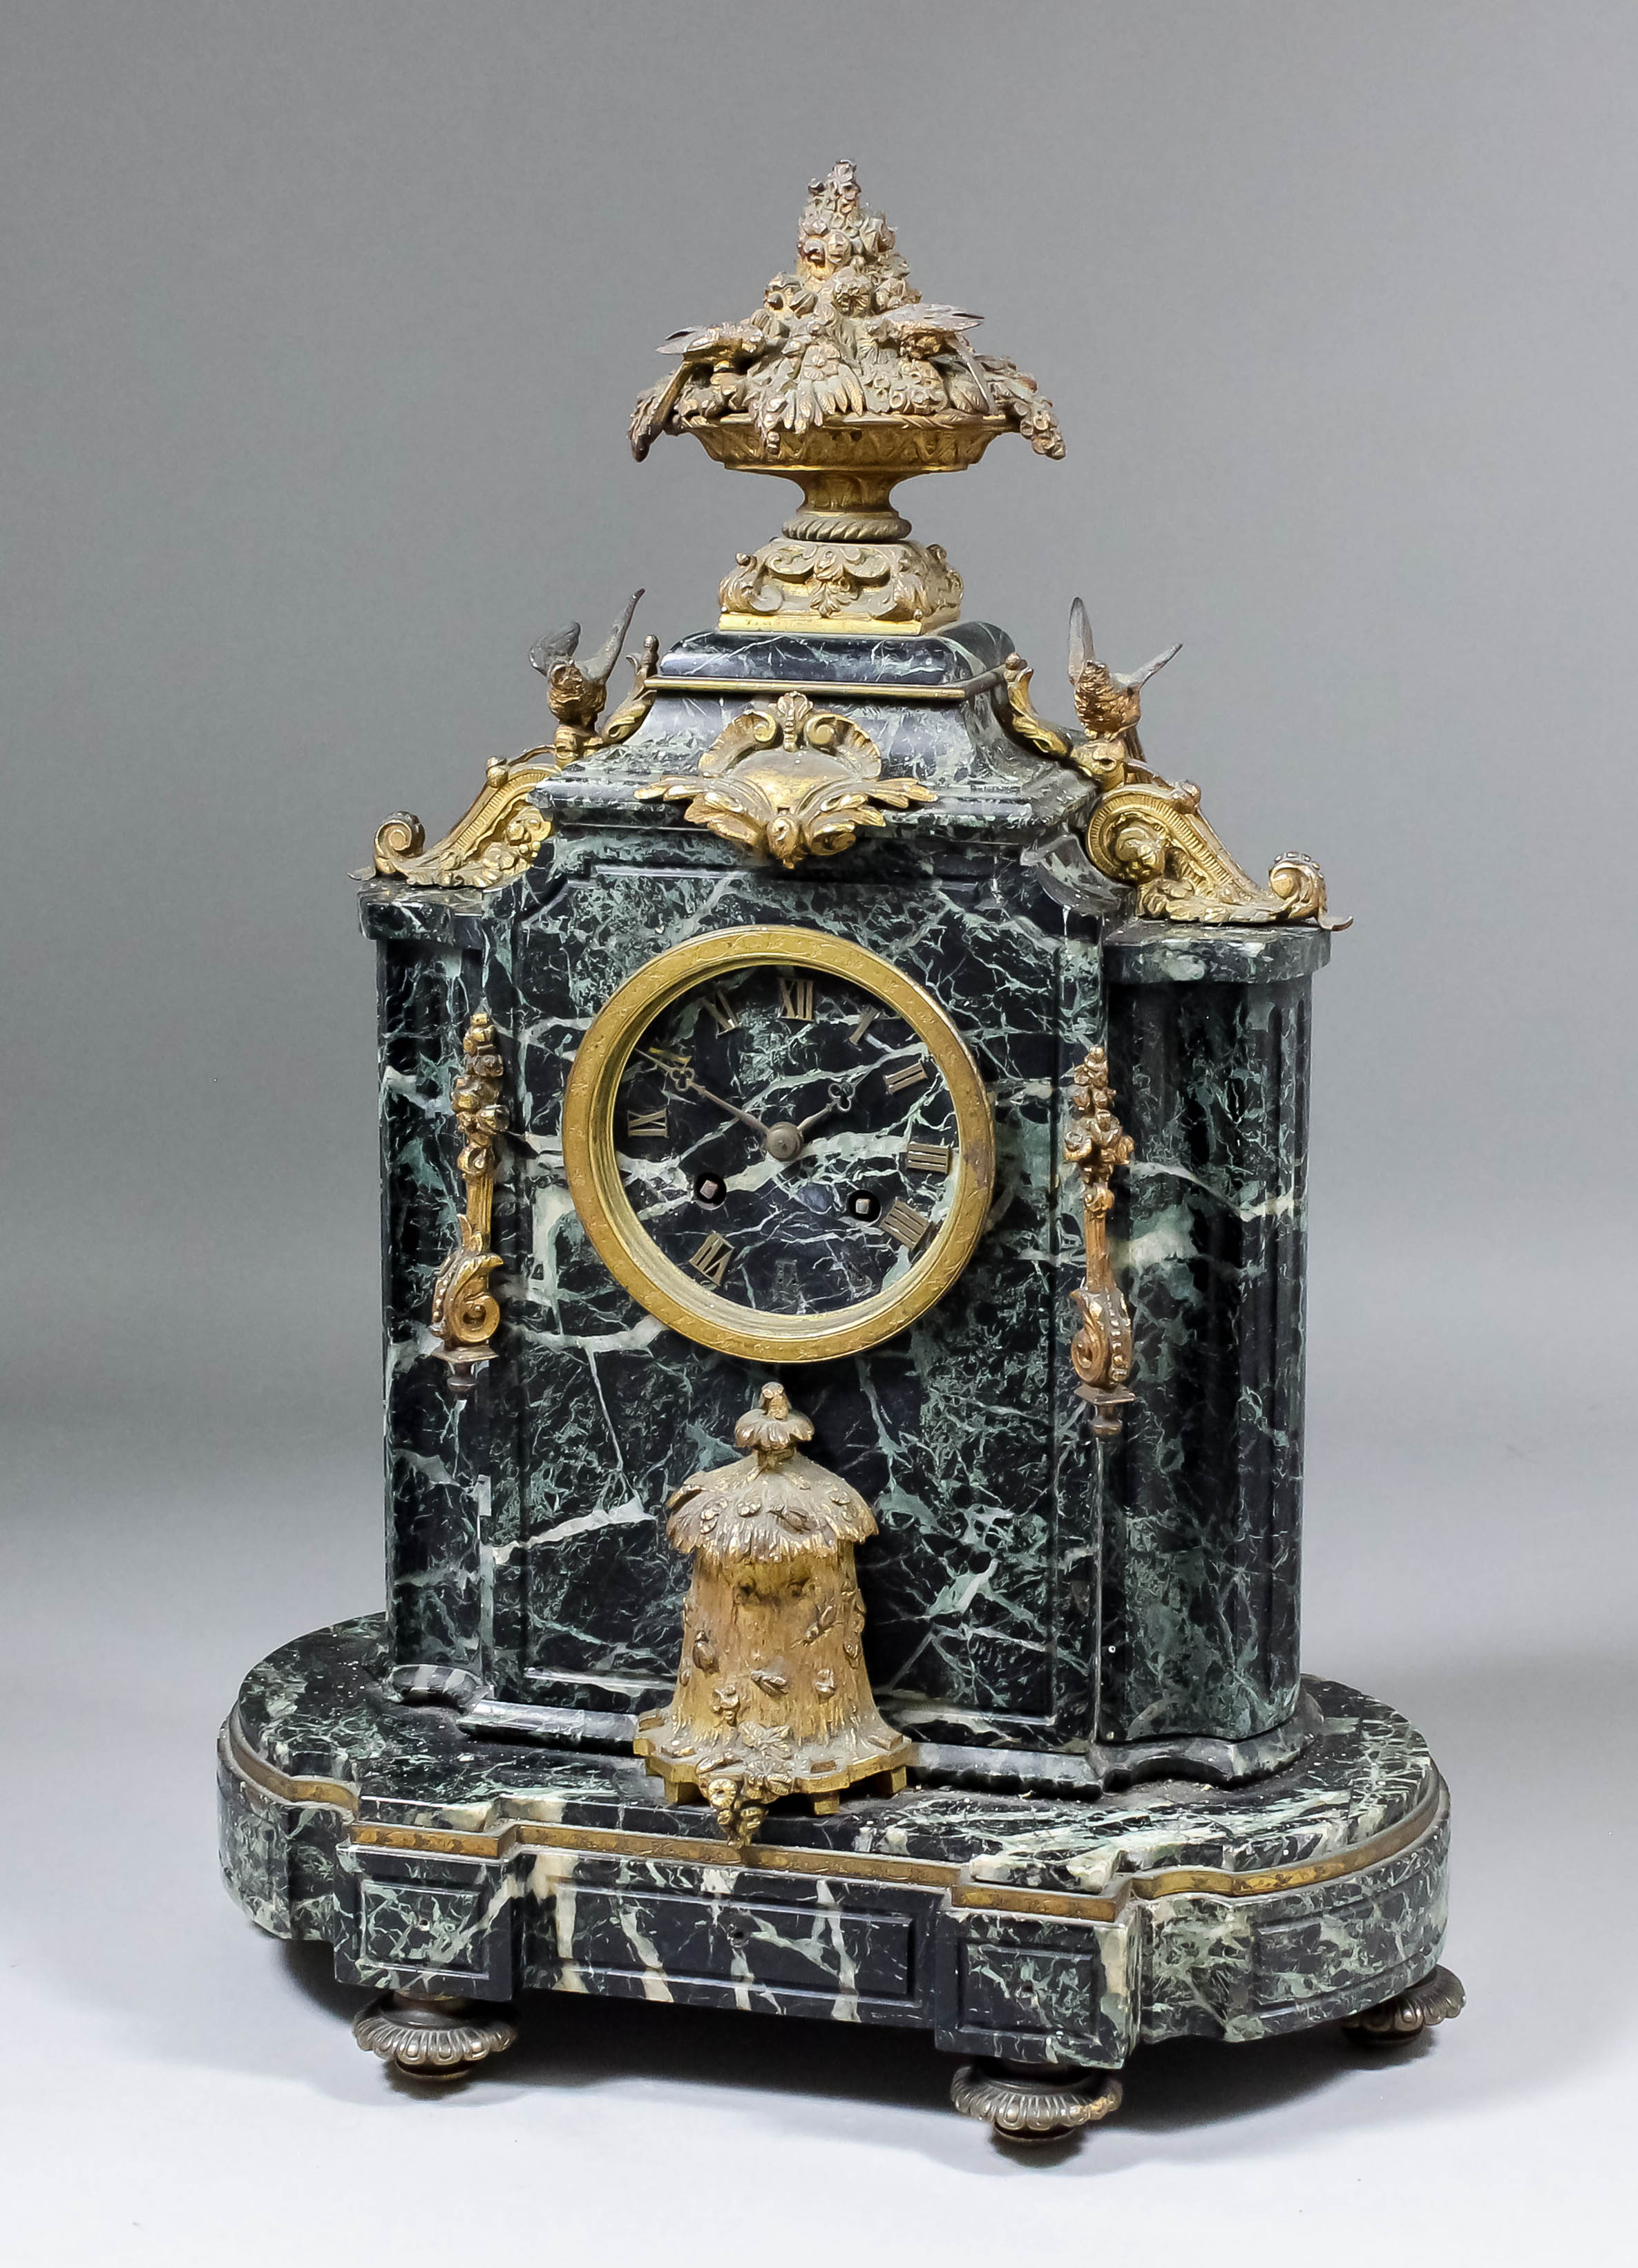 A 19th Century French gilt brass mounted green veined marble mantel clock by Japy Freres, retailed